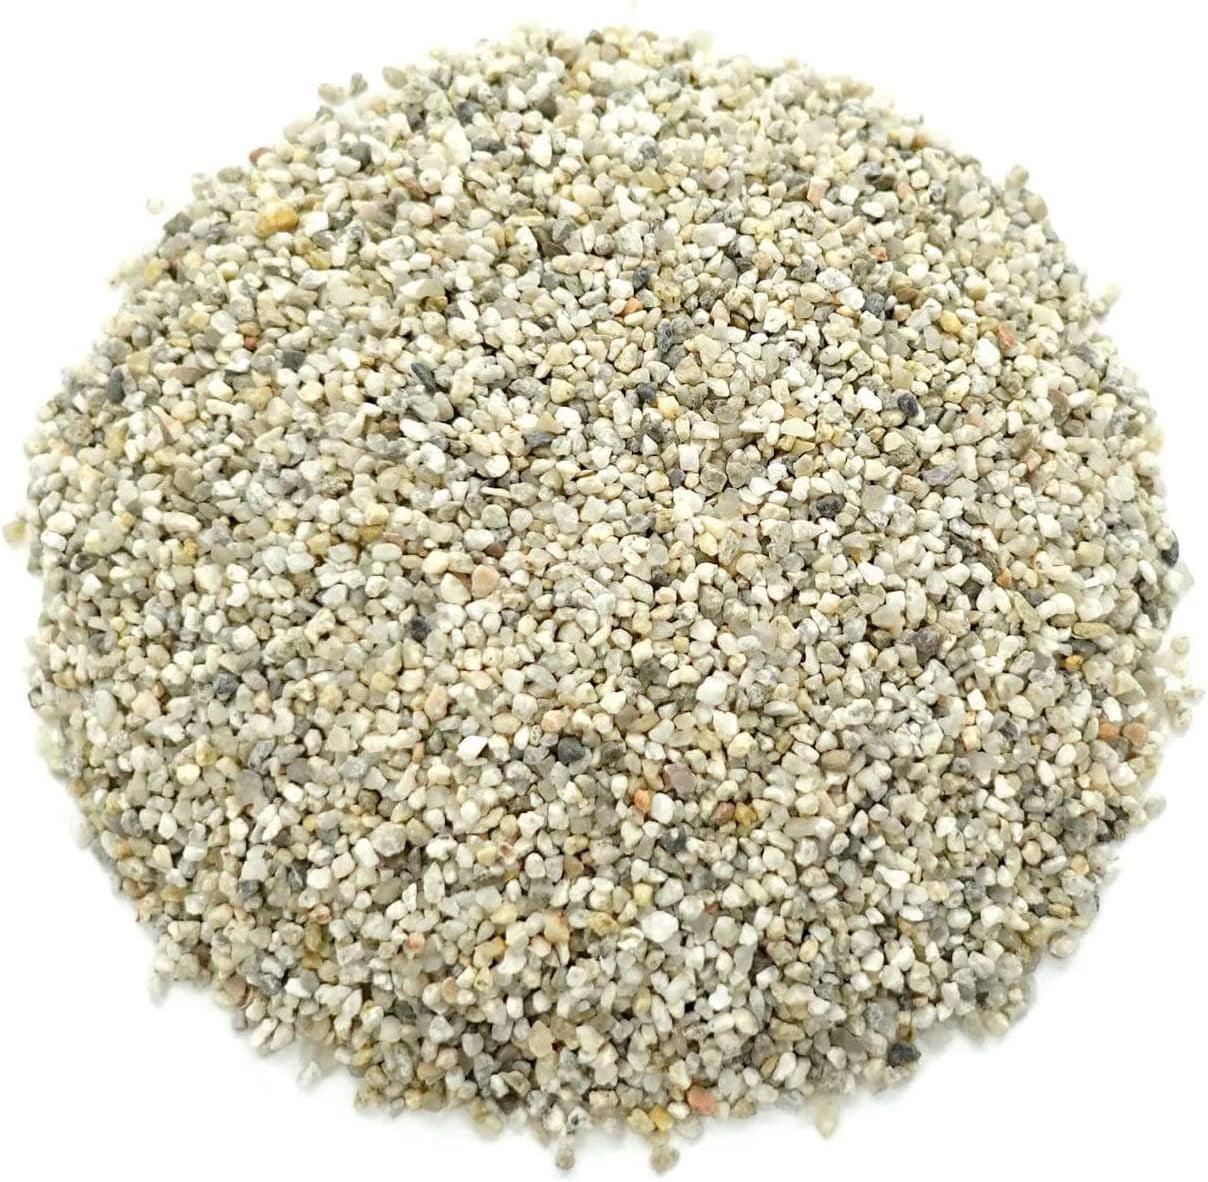 1 Pound Natural Coarse Silica Sand - for Use in Crafts, Decor, Gardening, Vase Filler, Aquariums, Terrariums and More - WoodArtSupply